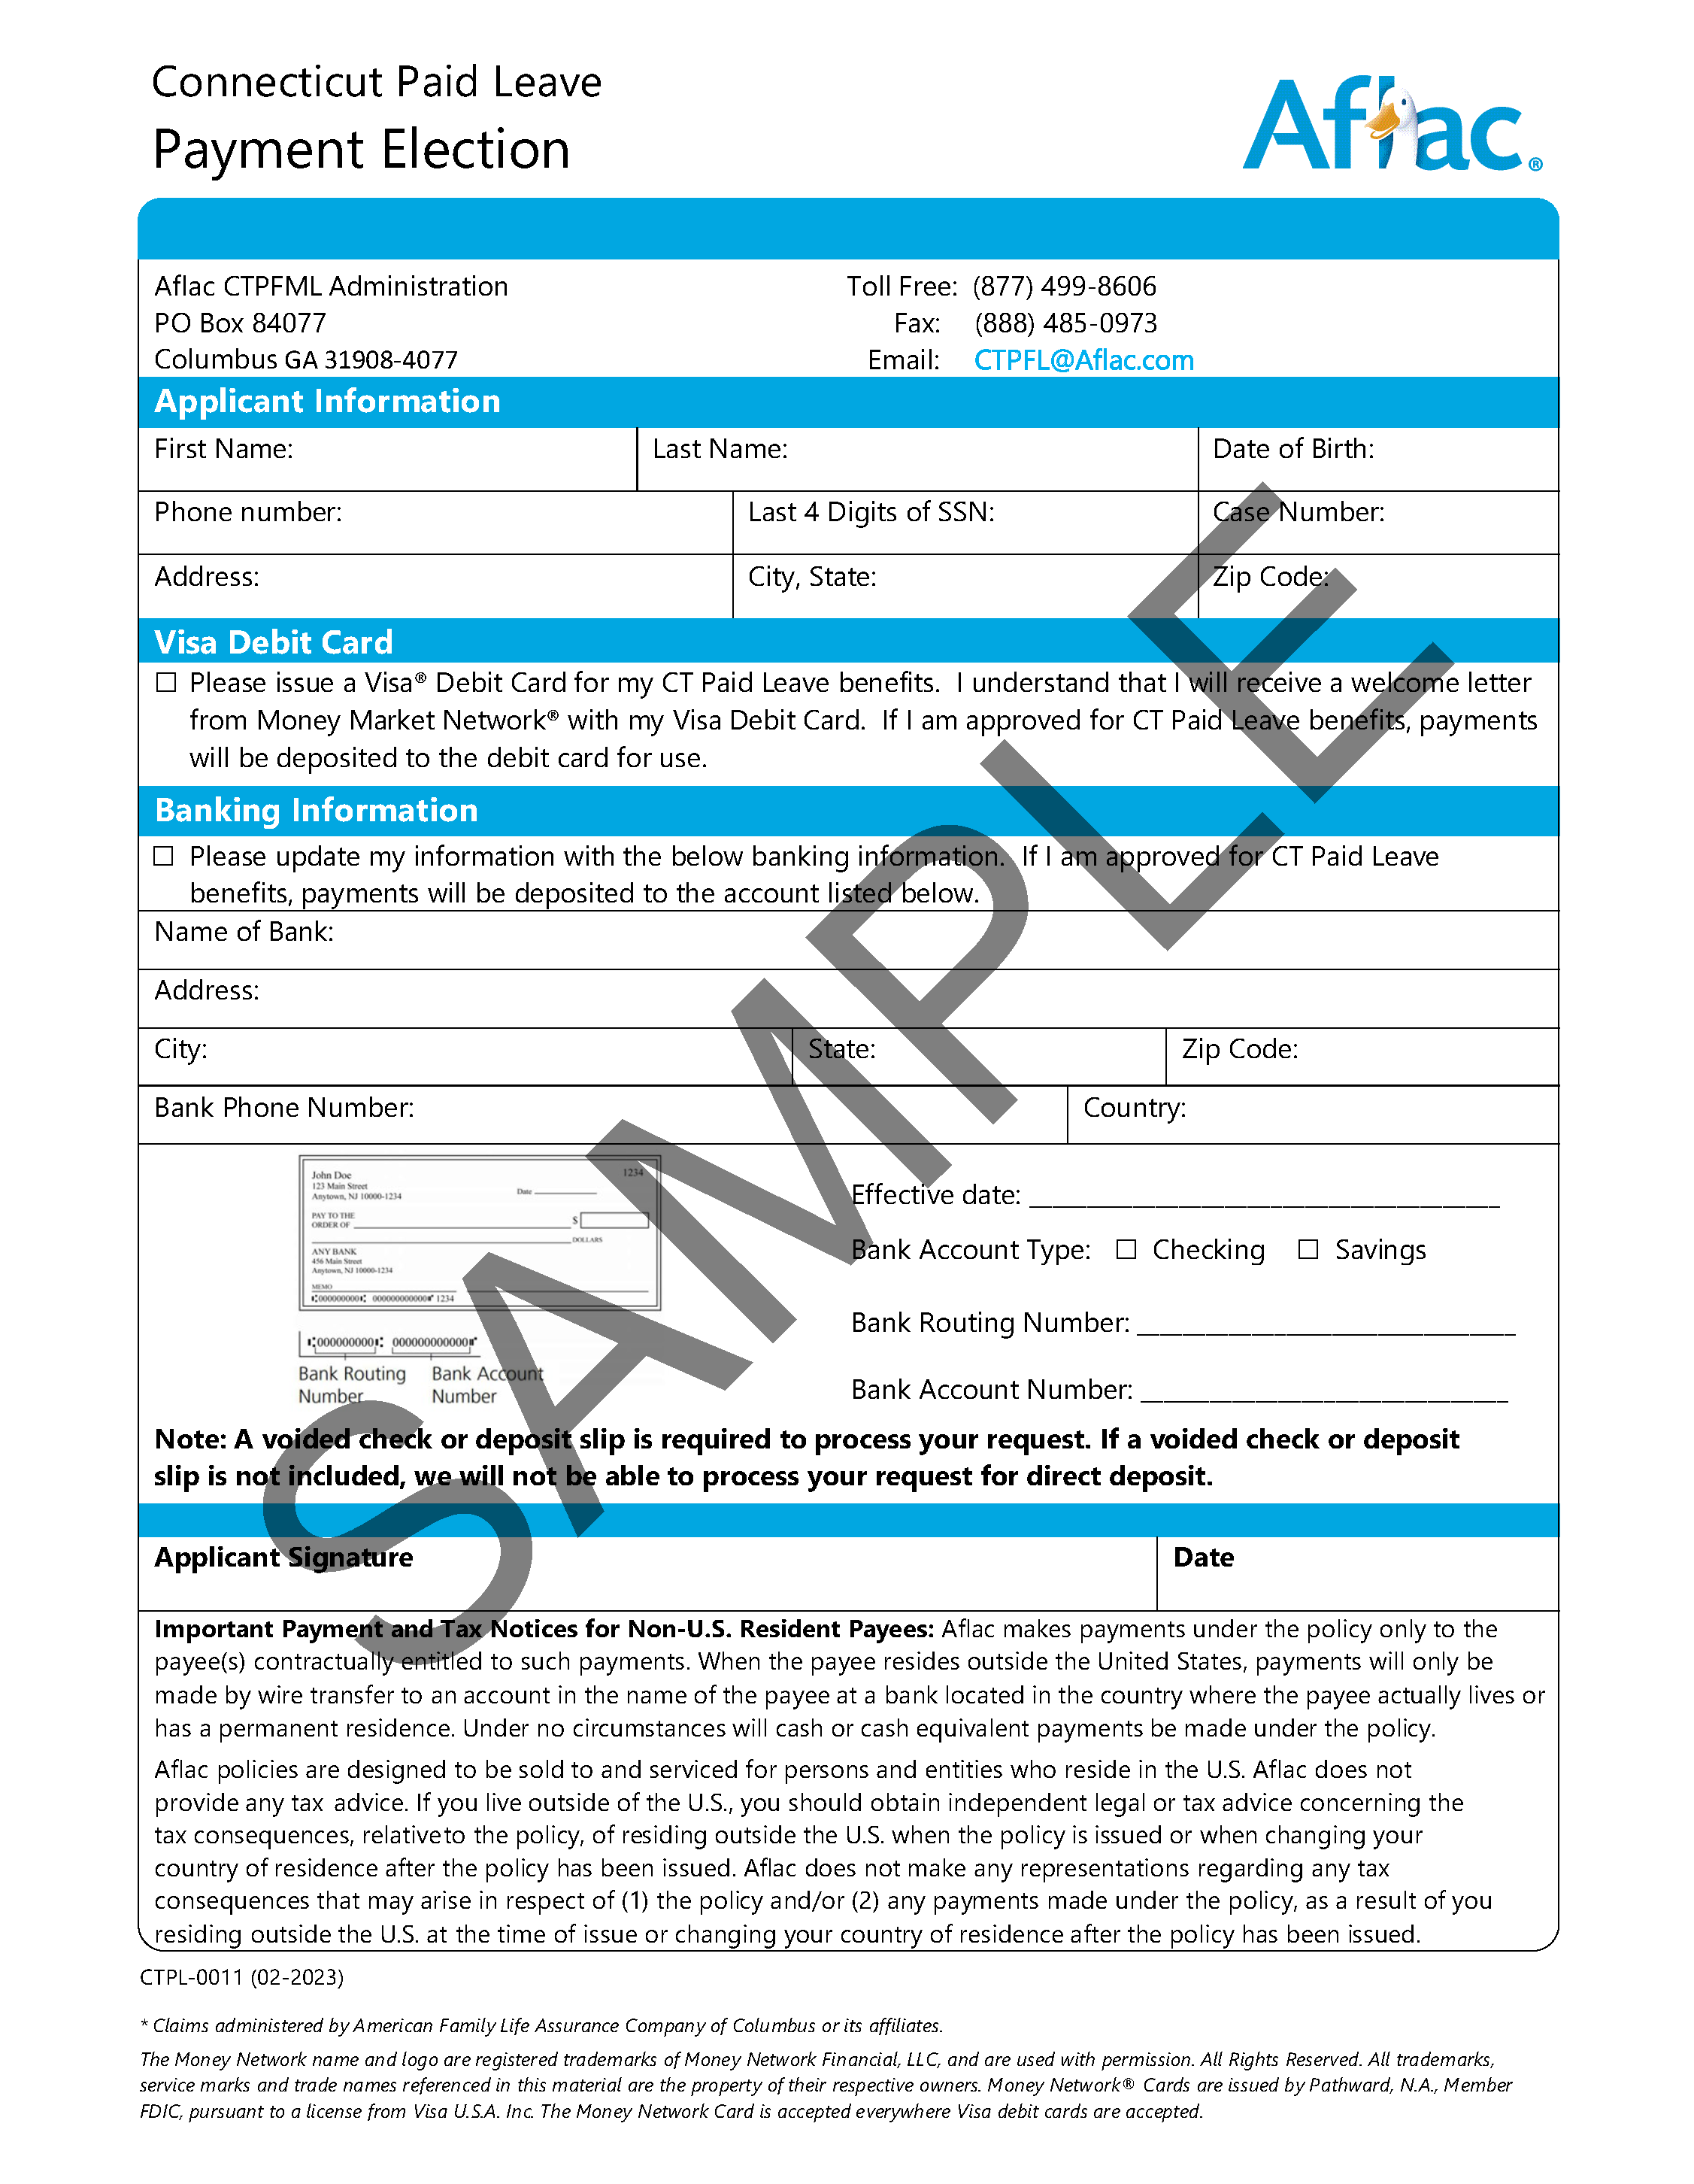 Sample CT Paid Leave Payment Election form